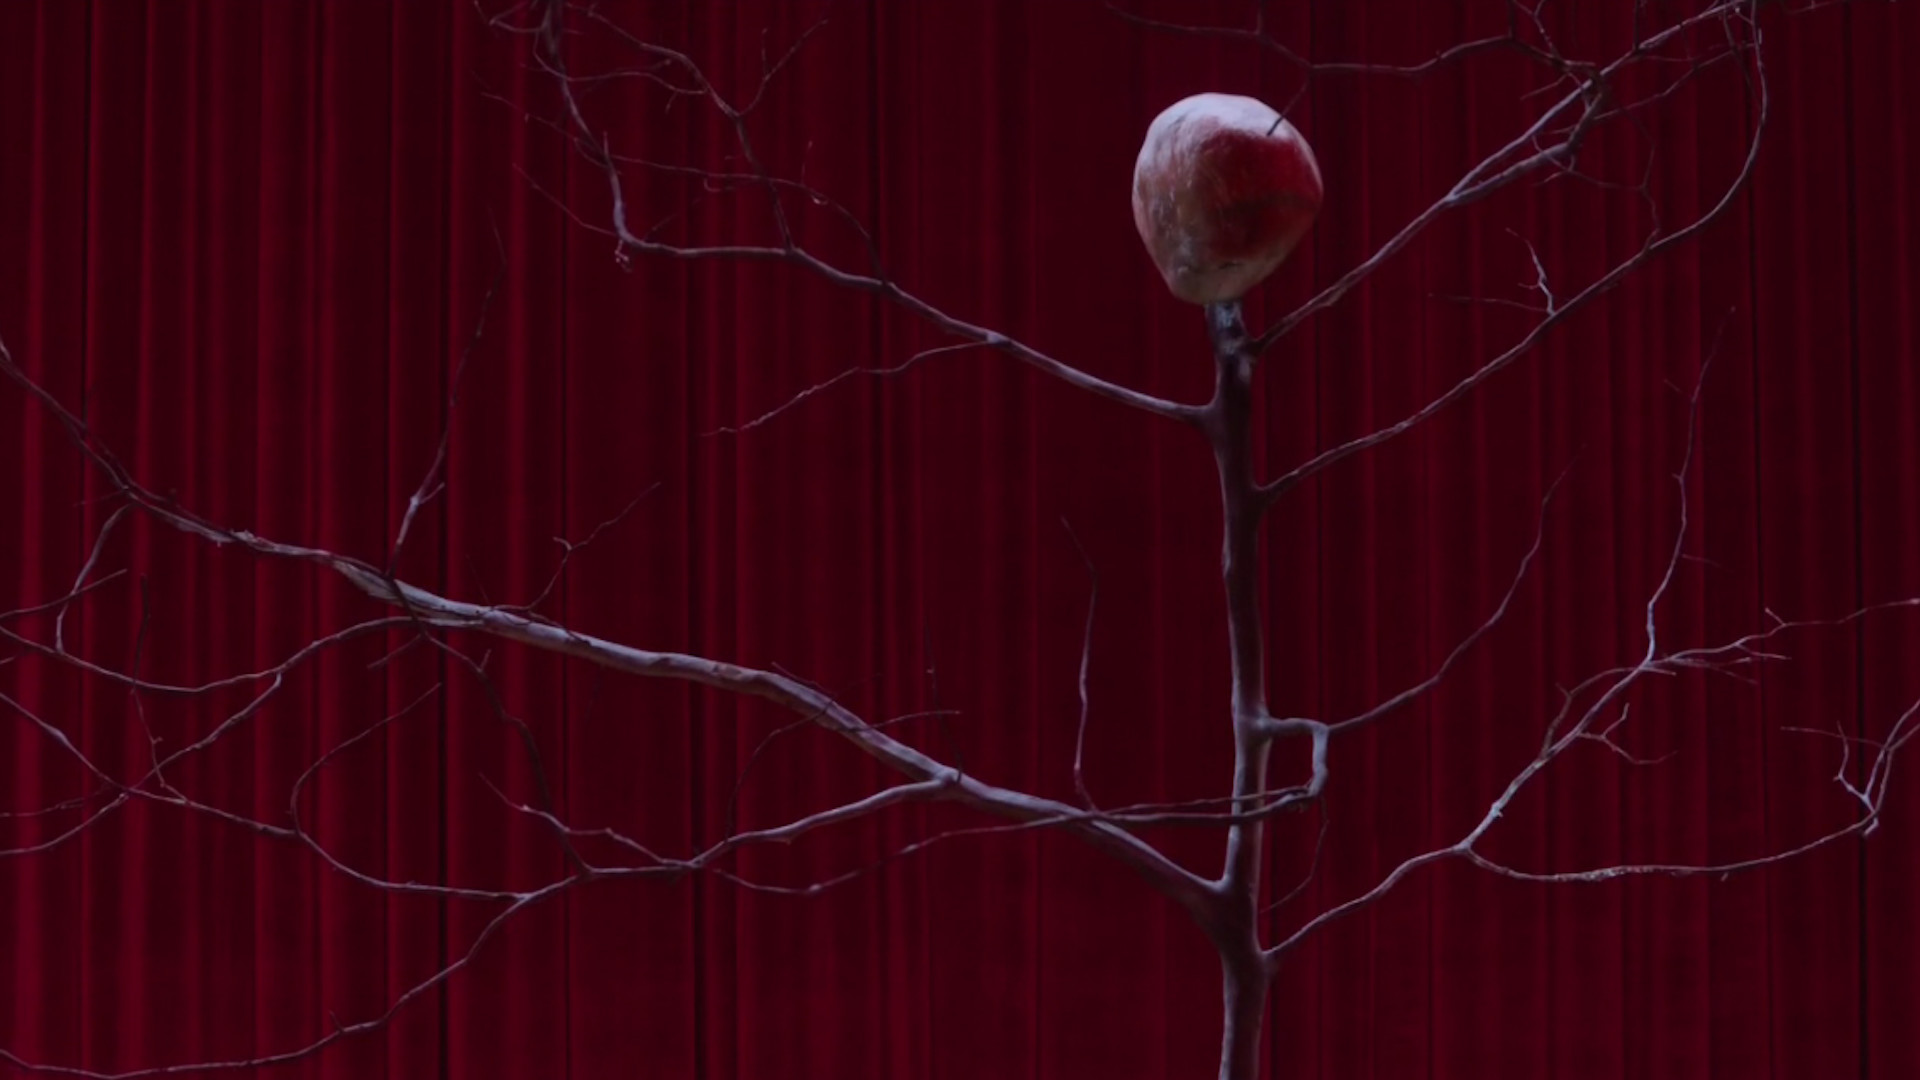 Twin Peaks images Season 3 Promotional Photo HD wallpaper and